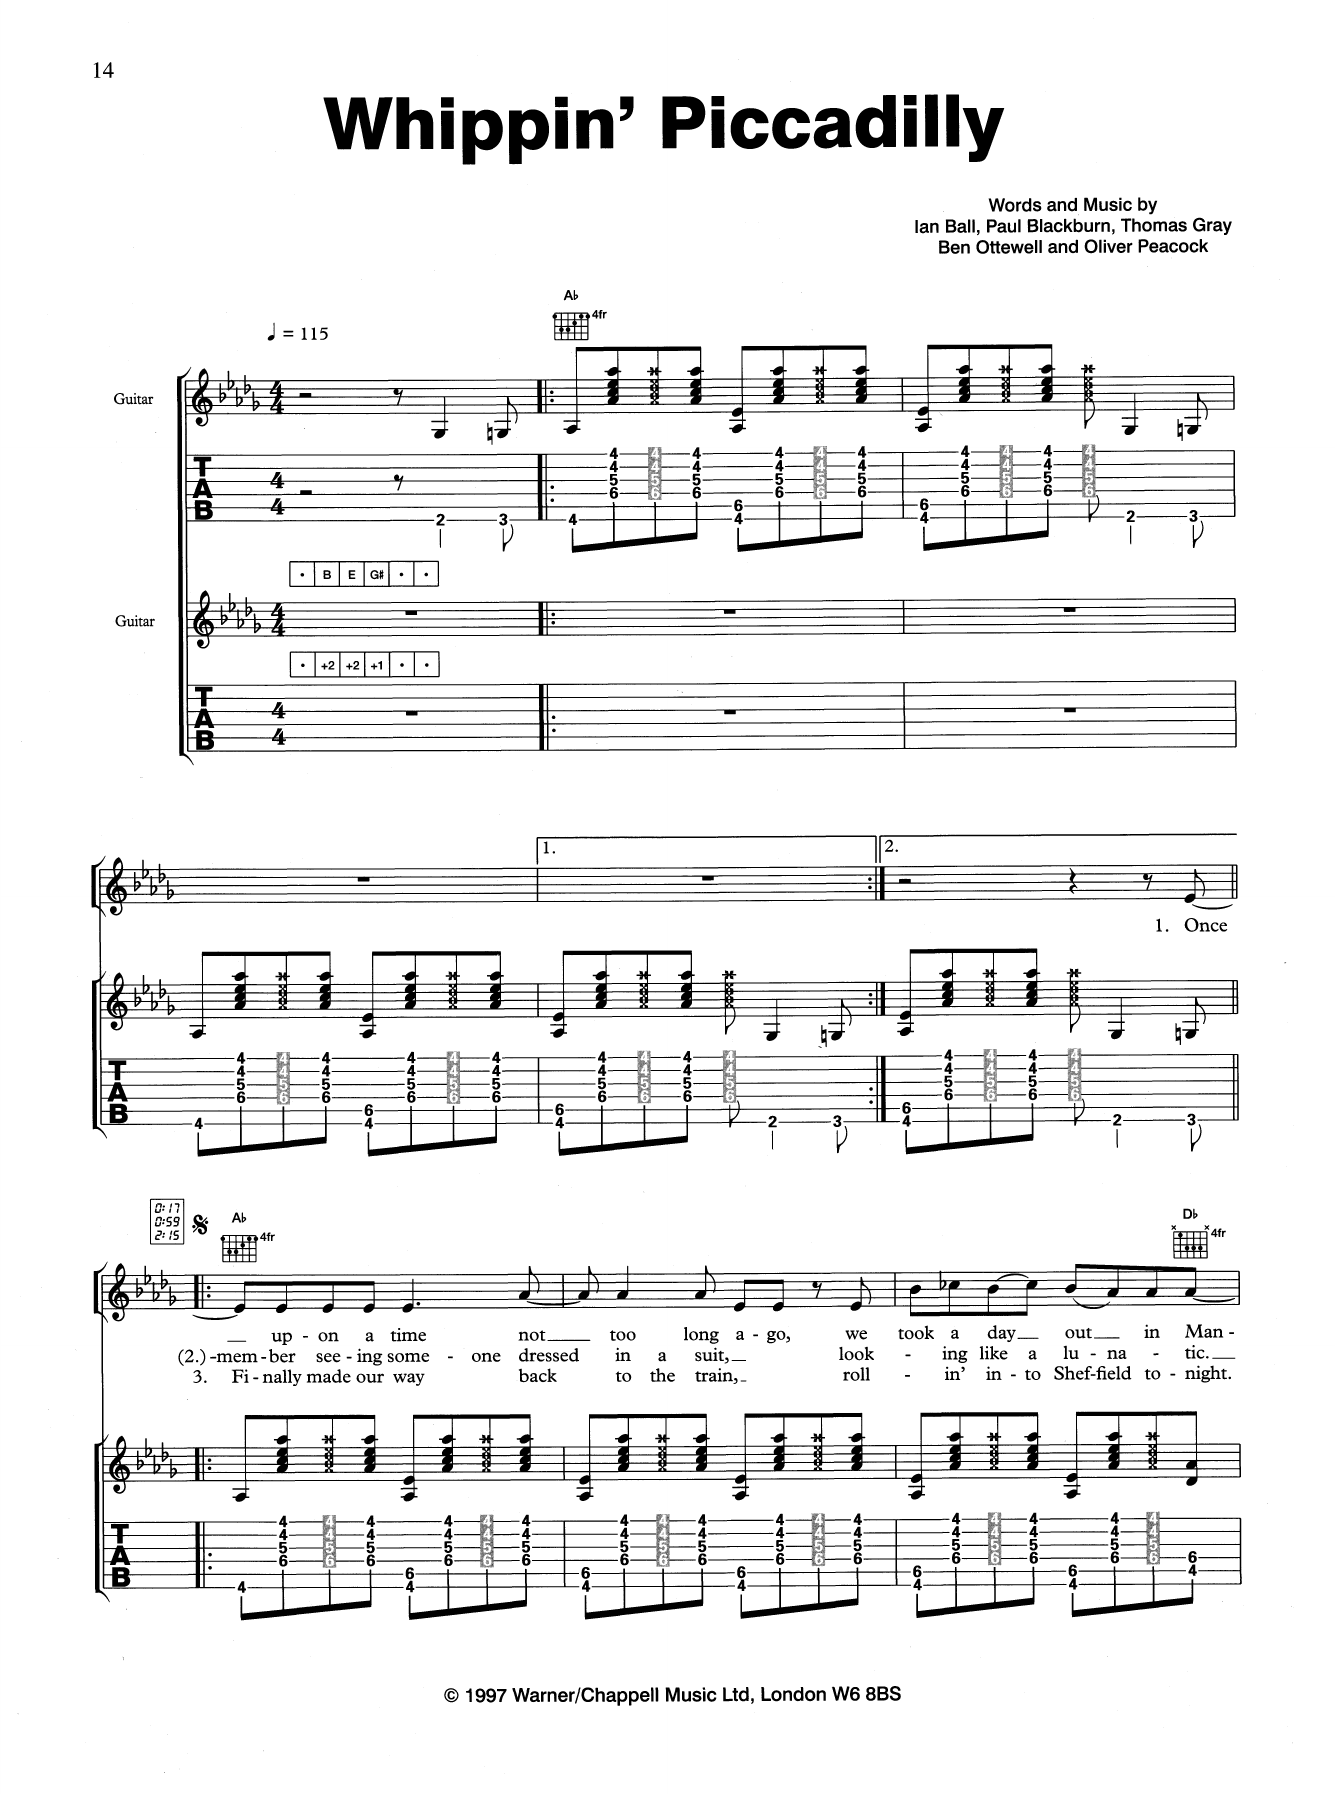 Download Gomez Whippin' Piccadilly Sheet Music